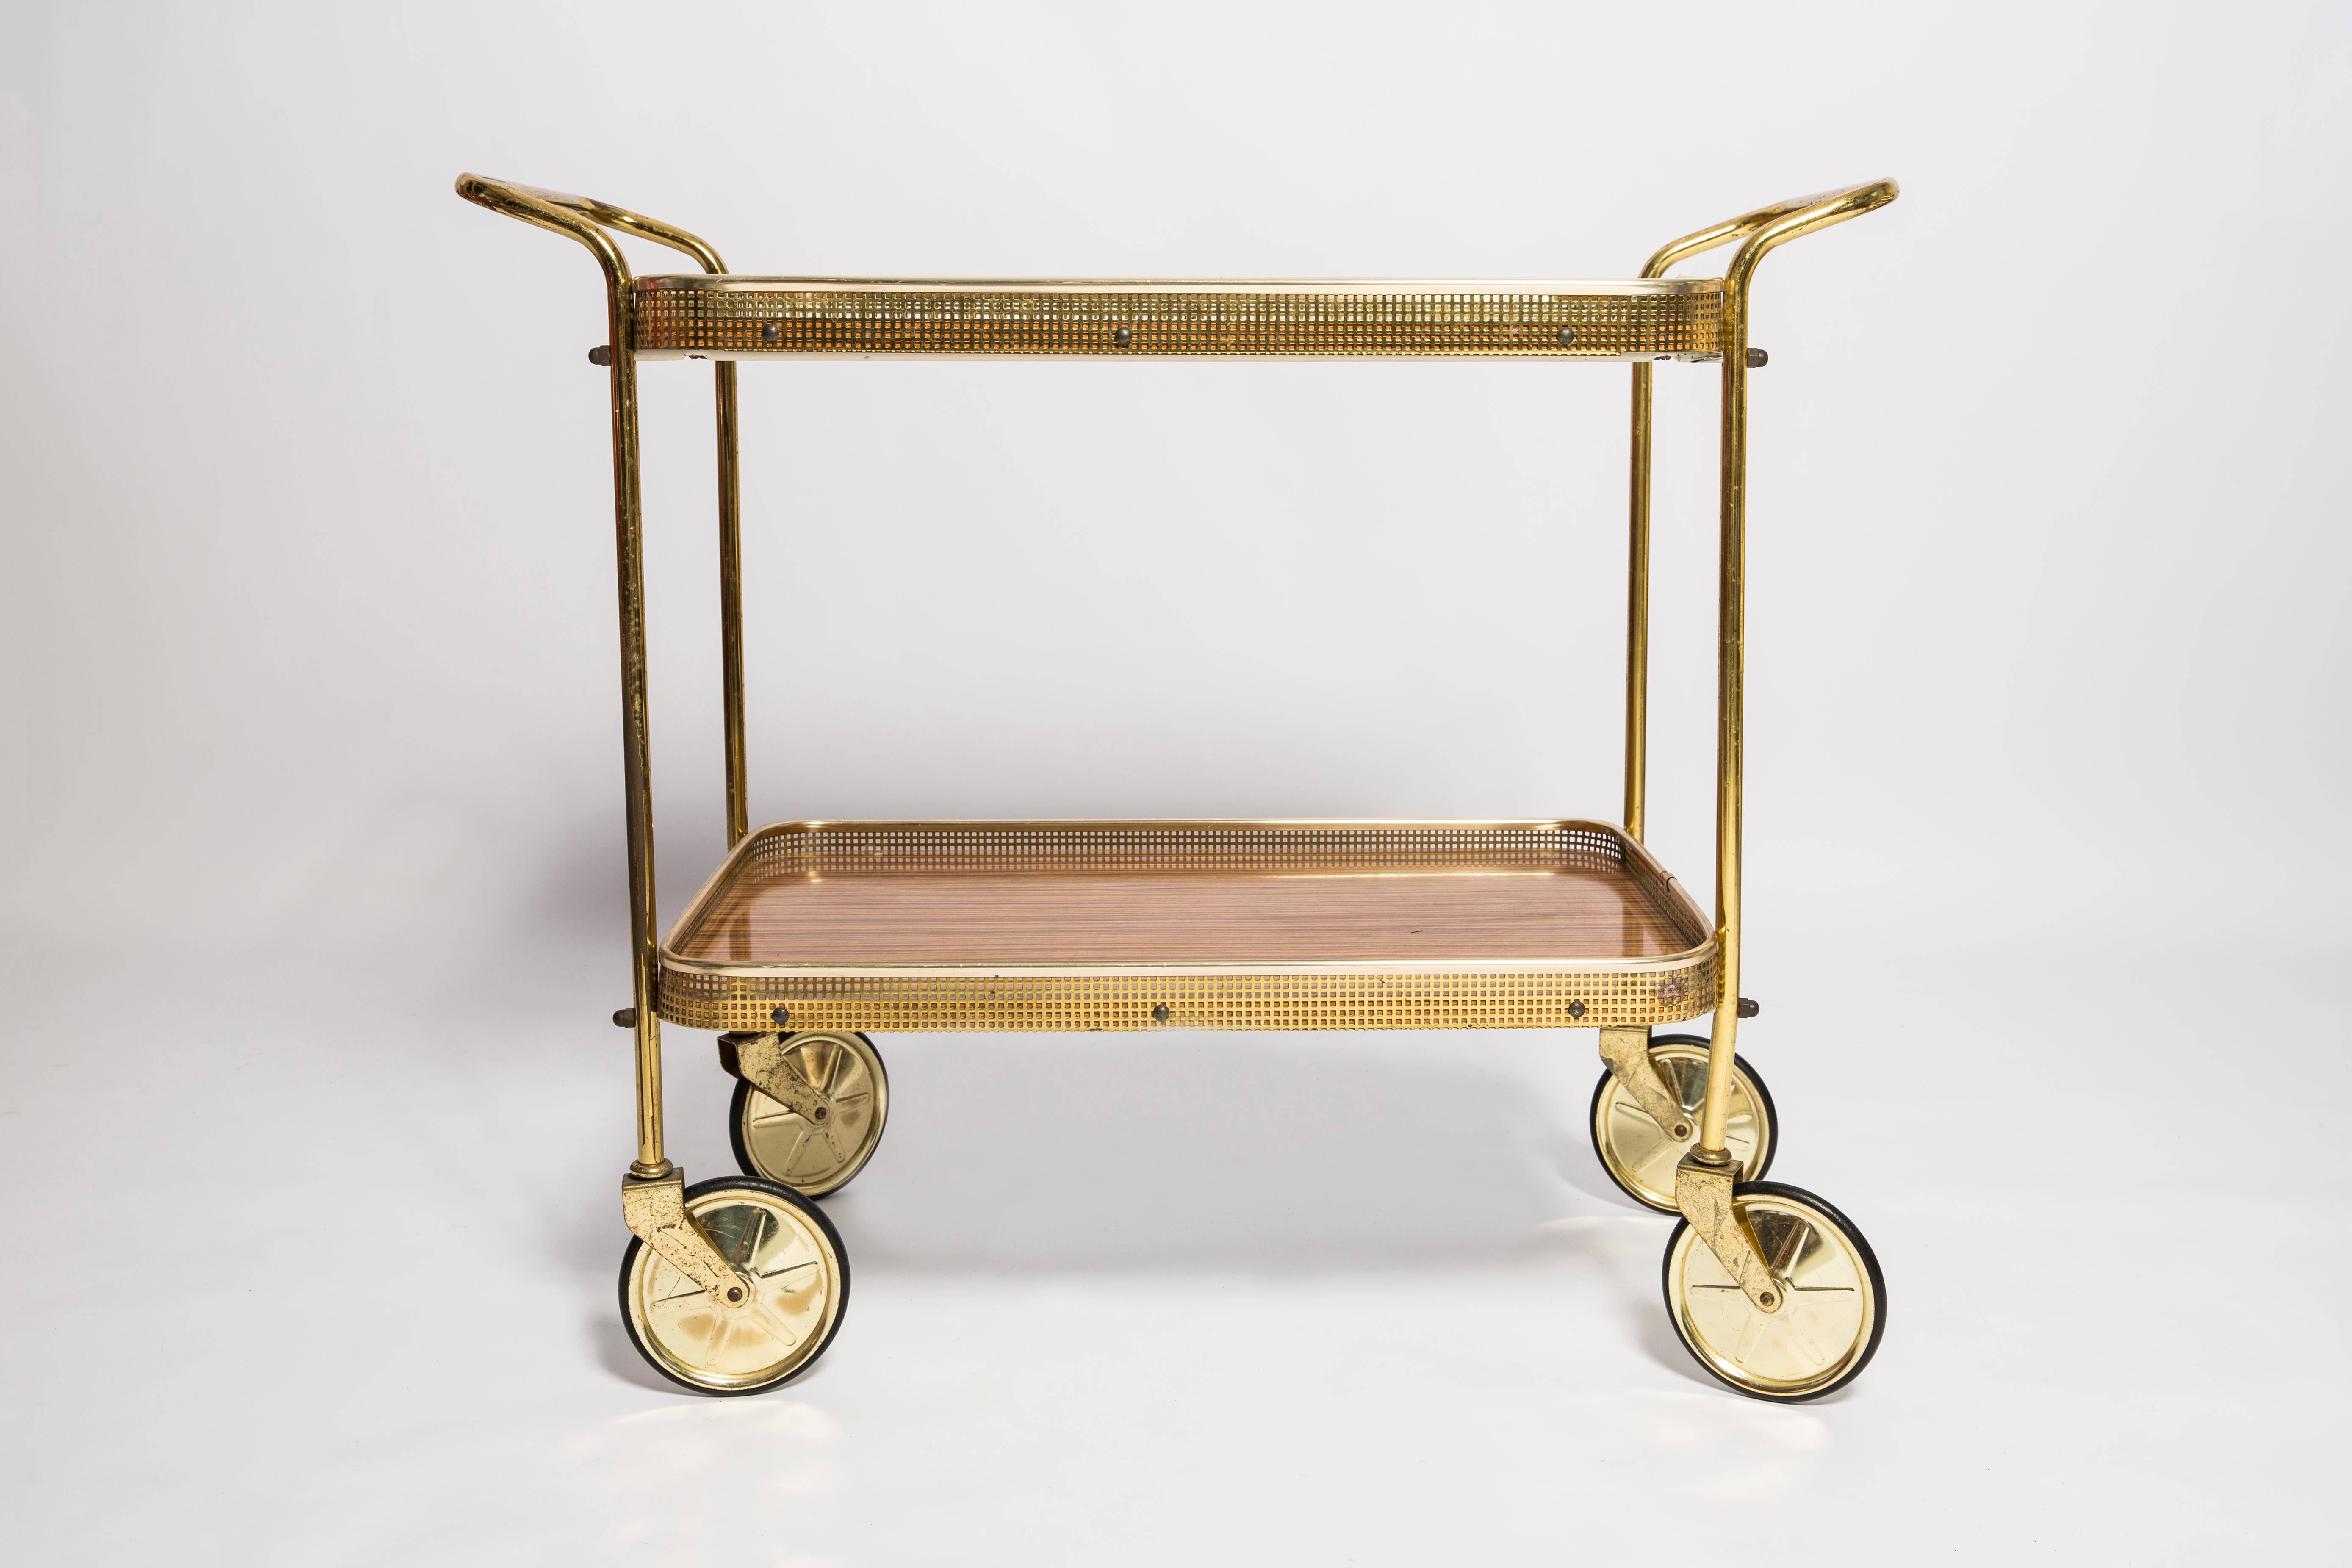 20th Century Mid-Century Modern Vintage Bart Cart, Gold and Wood, Europe, 1960s For Sale